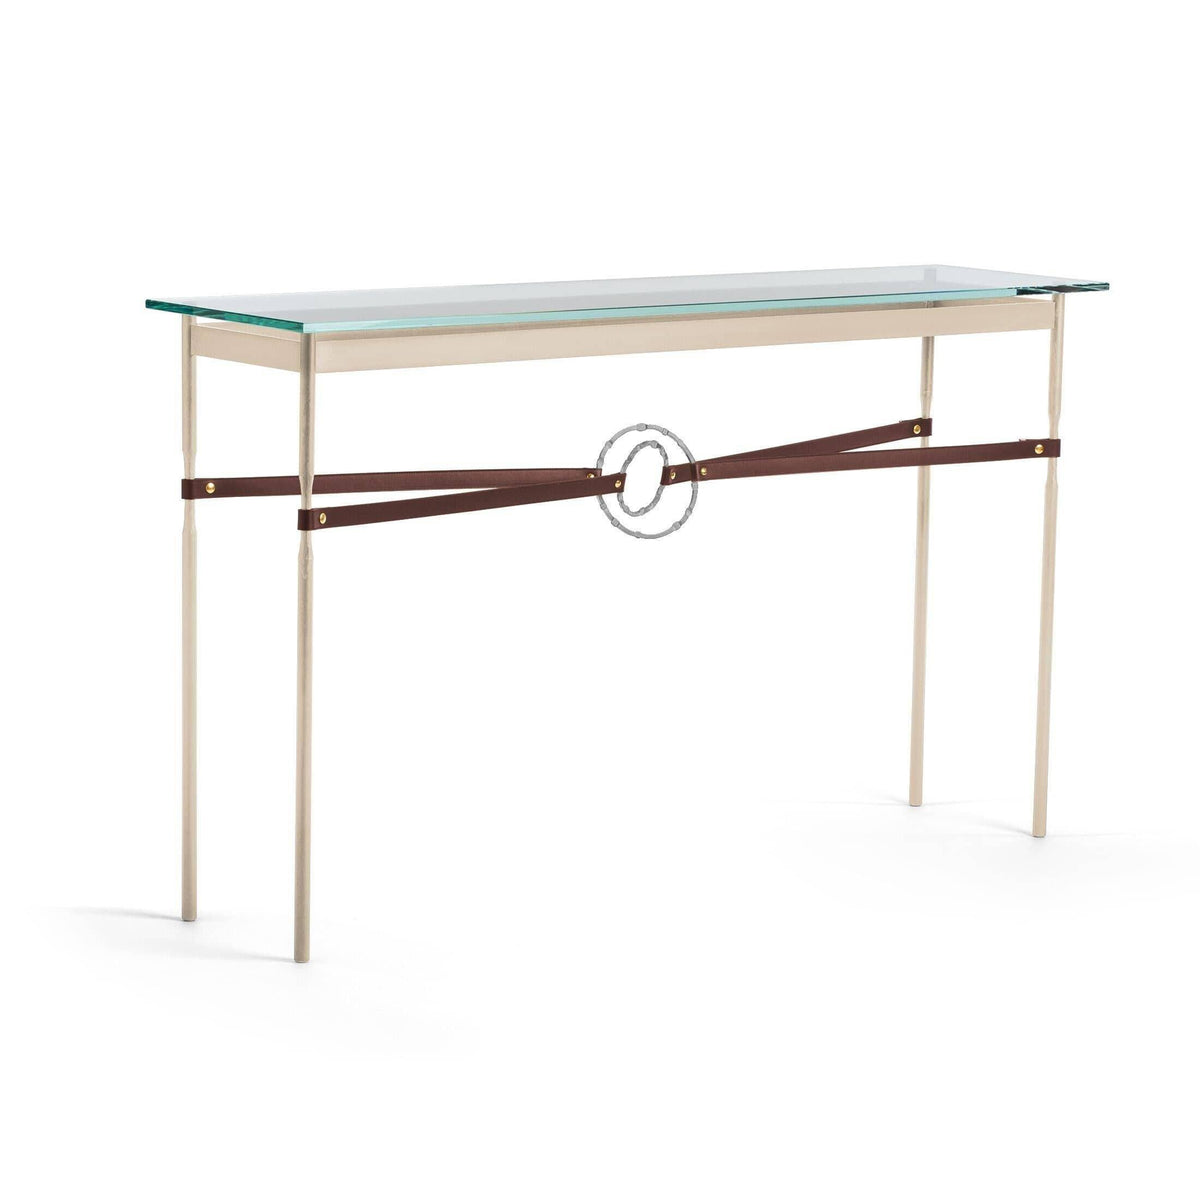 Hubbardton Forge - Equus Brown Leather Console Table - 750118-84-82-LB-VA0714 | Montreal Lighting & Hardware